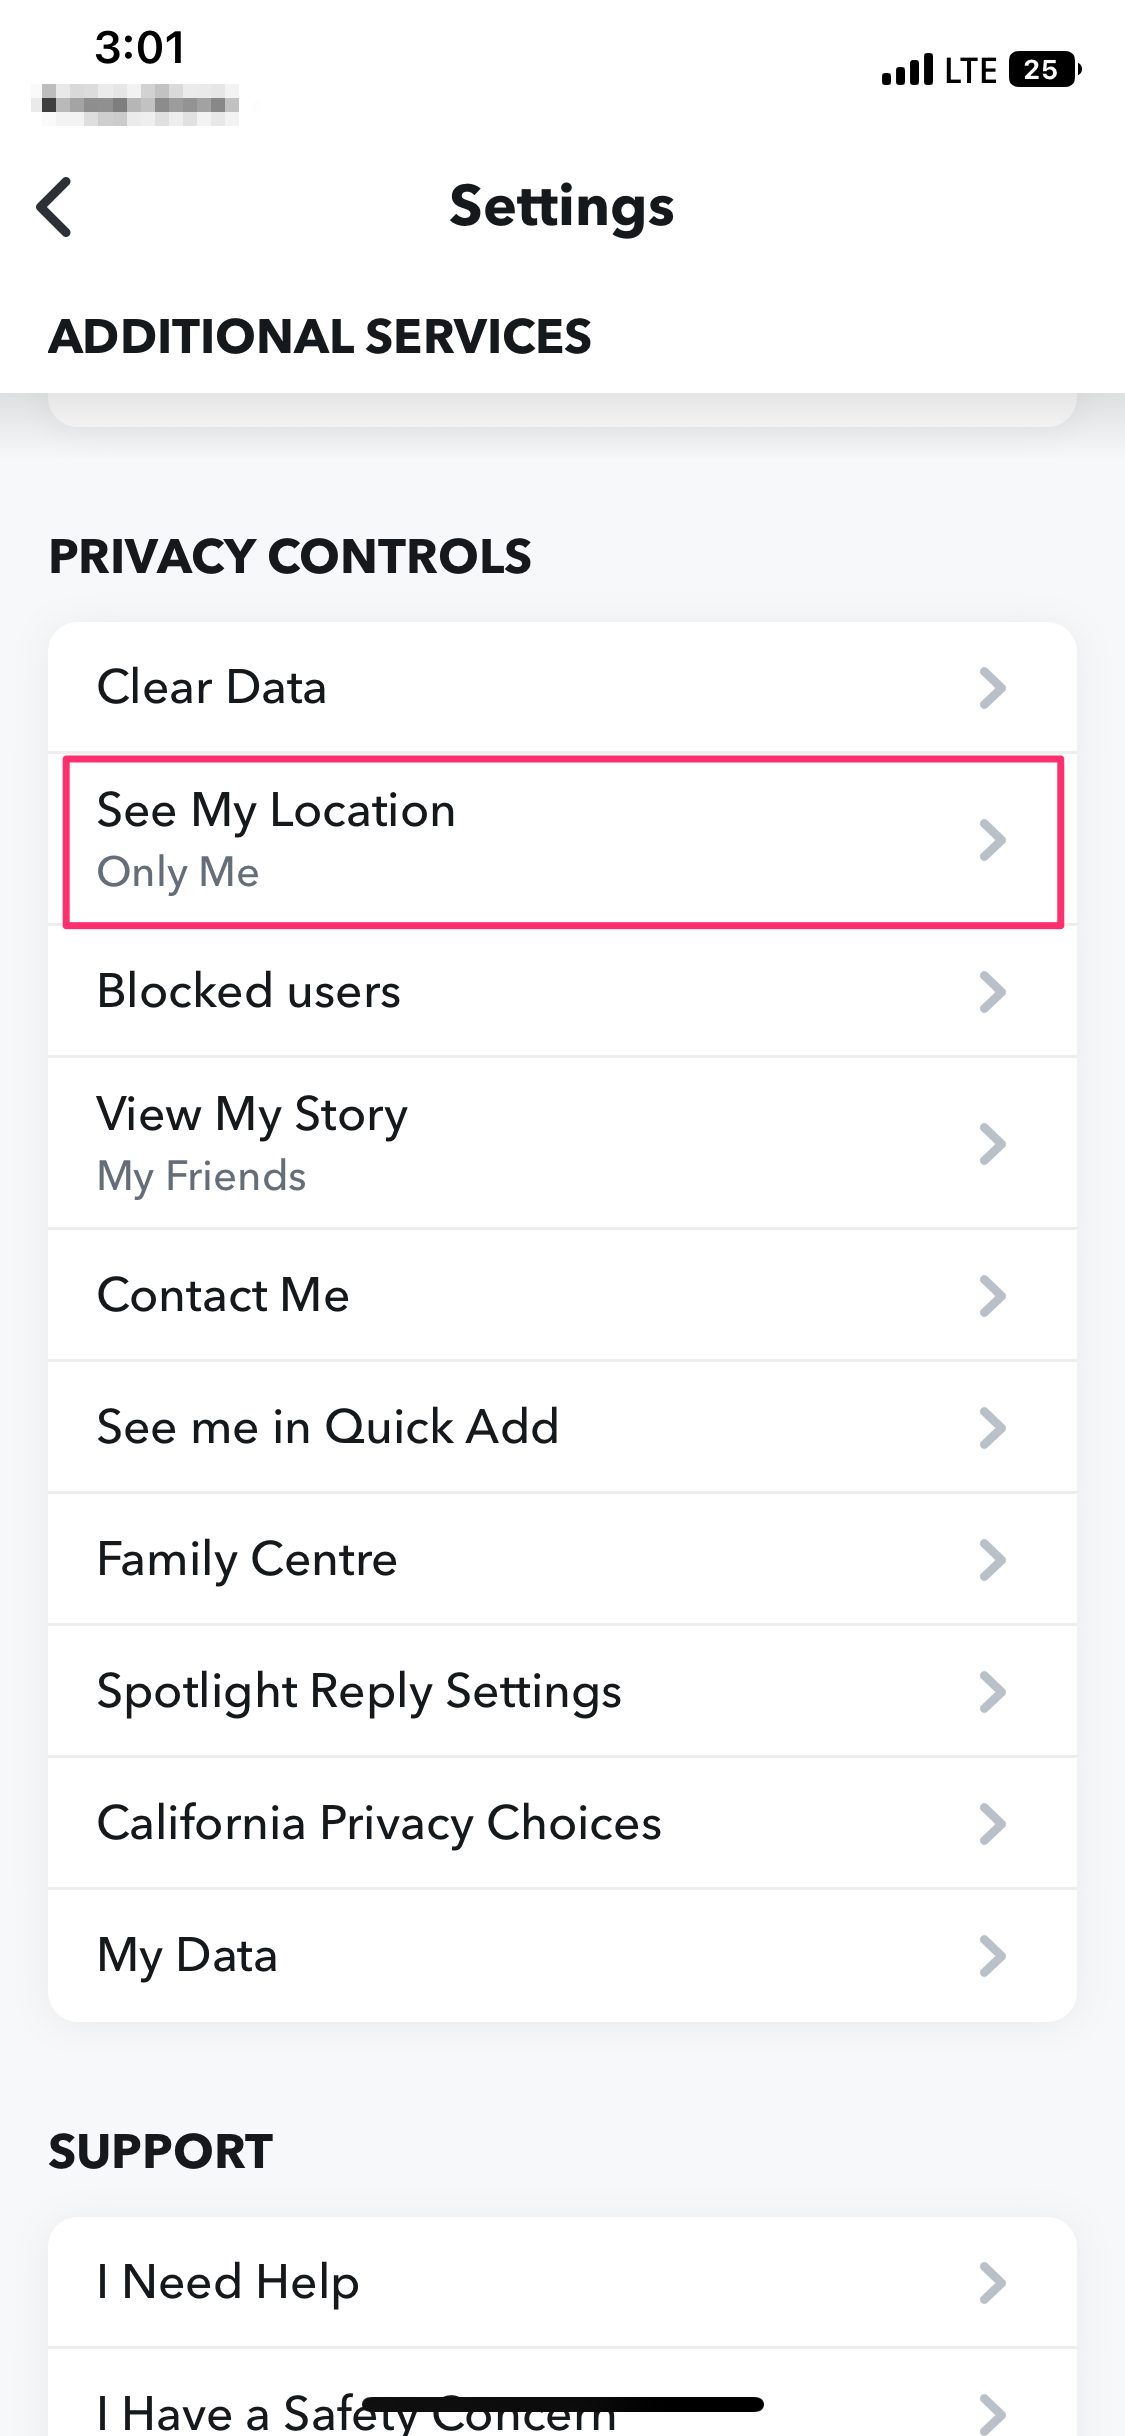 Select the "Set My Location" option